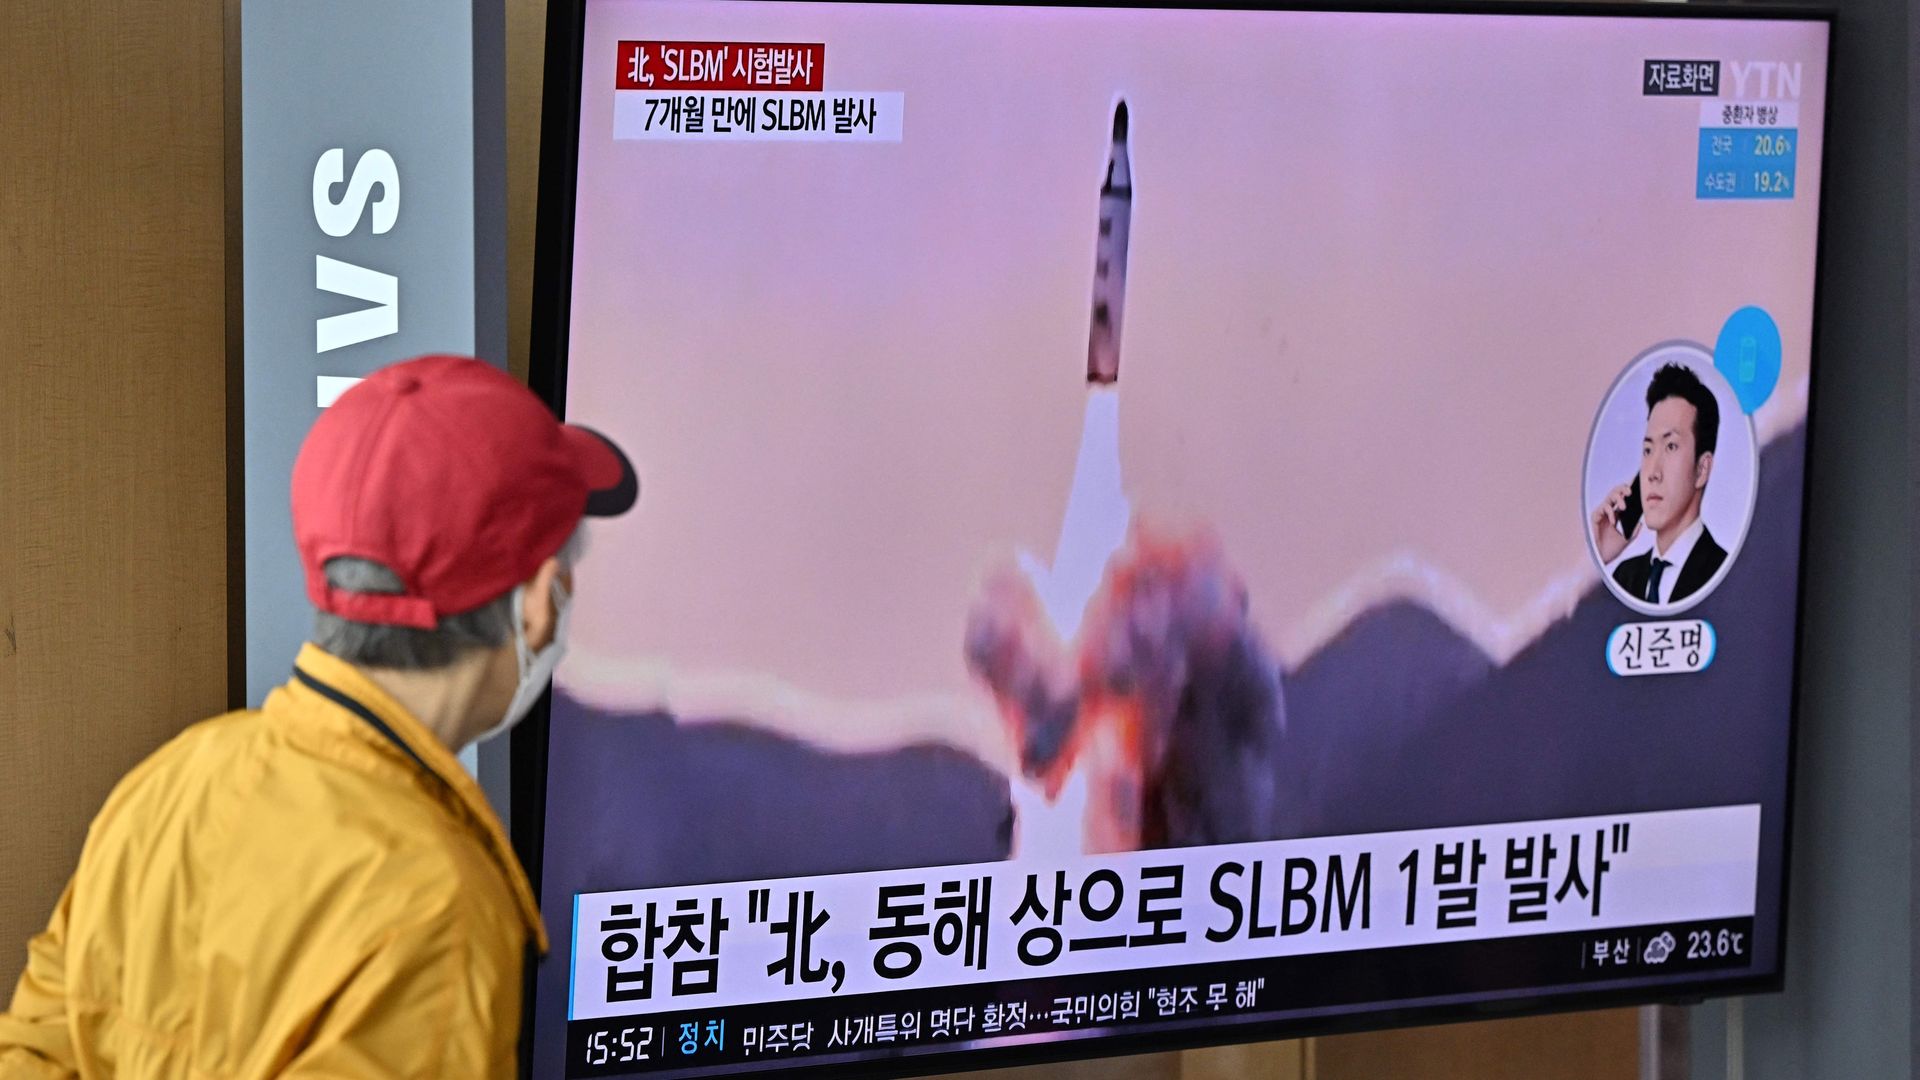 People at a railway station in Seoul on May 7 watching a news broadcast showing file footage of a North Korean missile test.